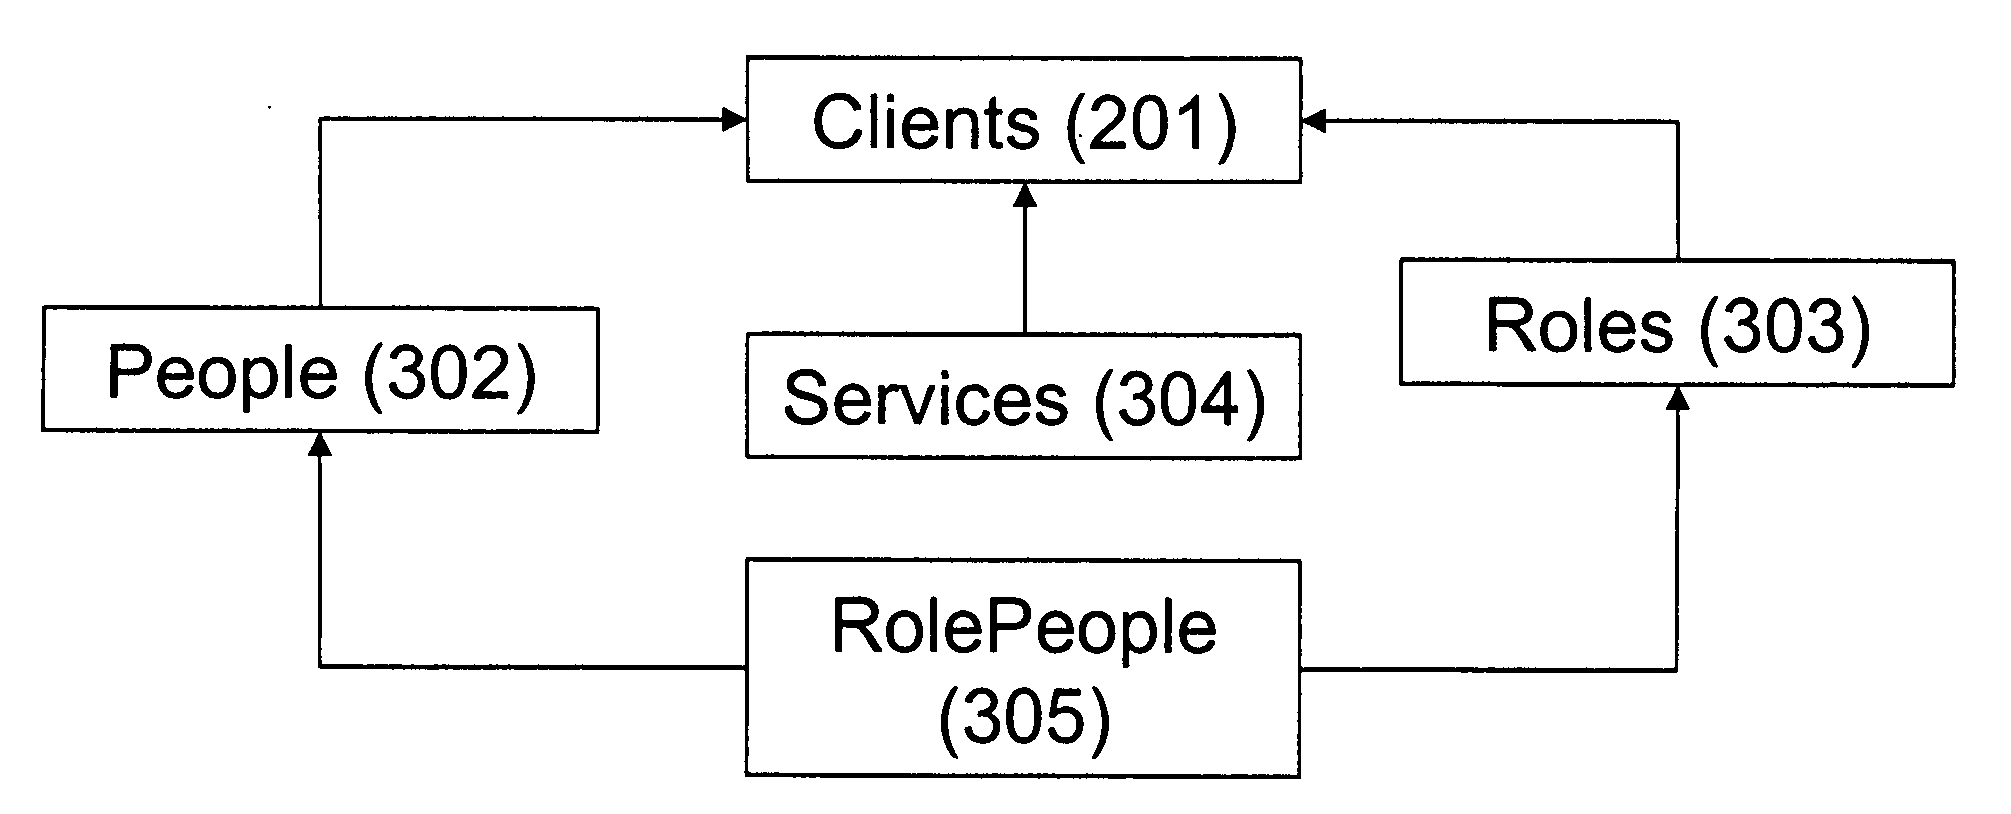 Enterprise process documentation and analysis system and method